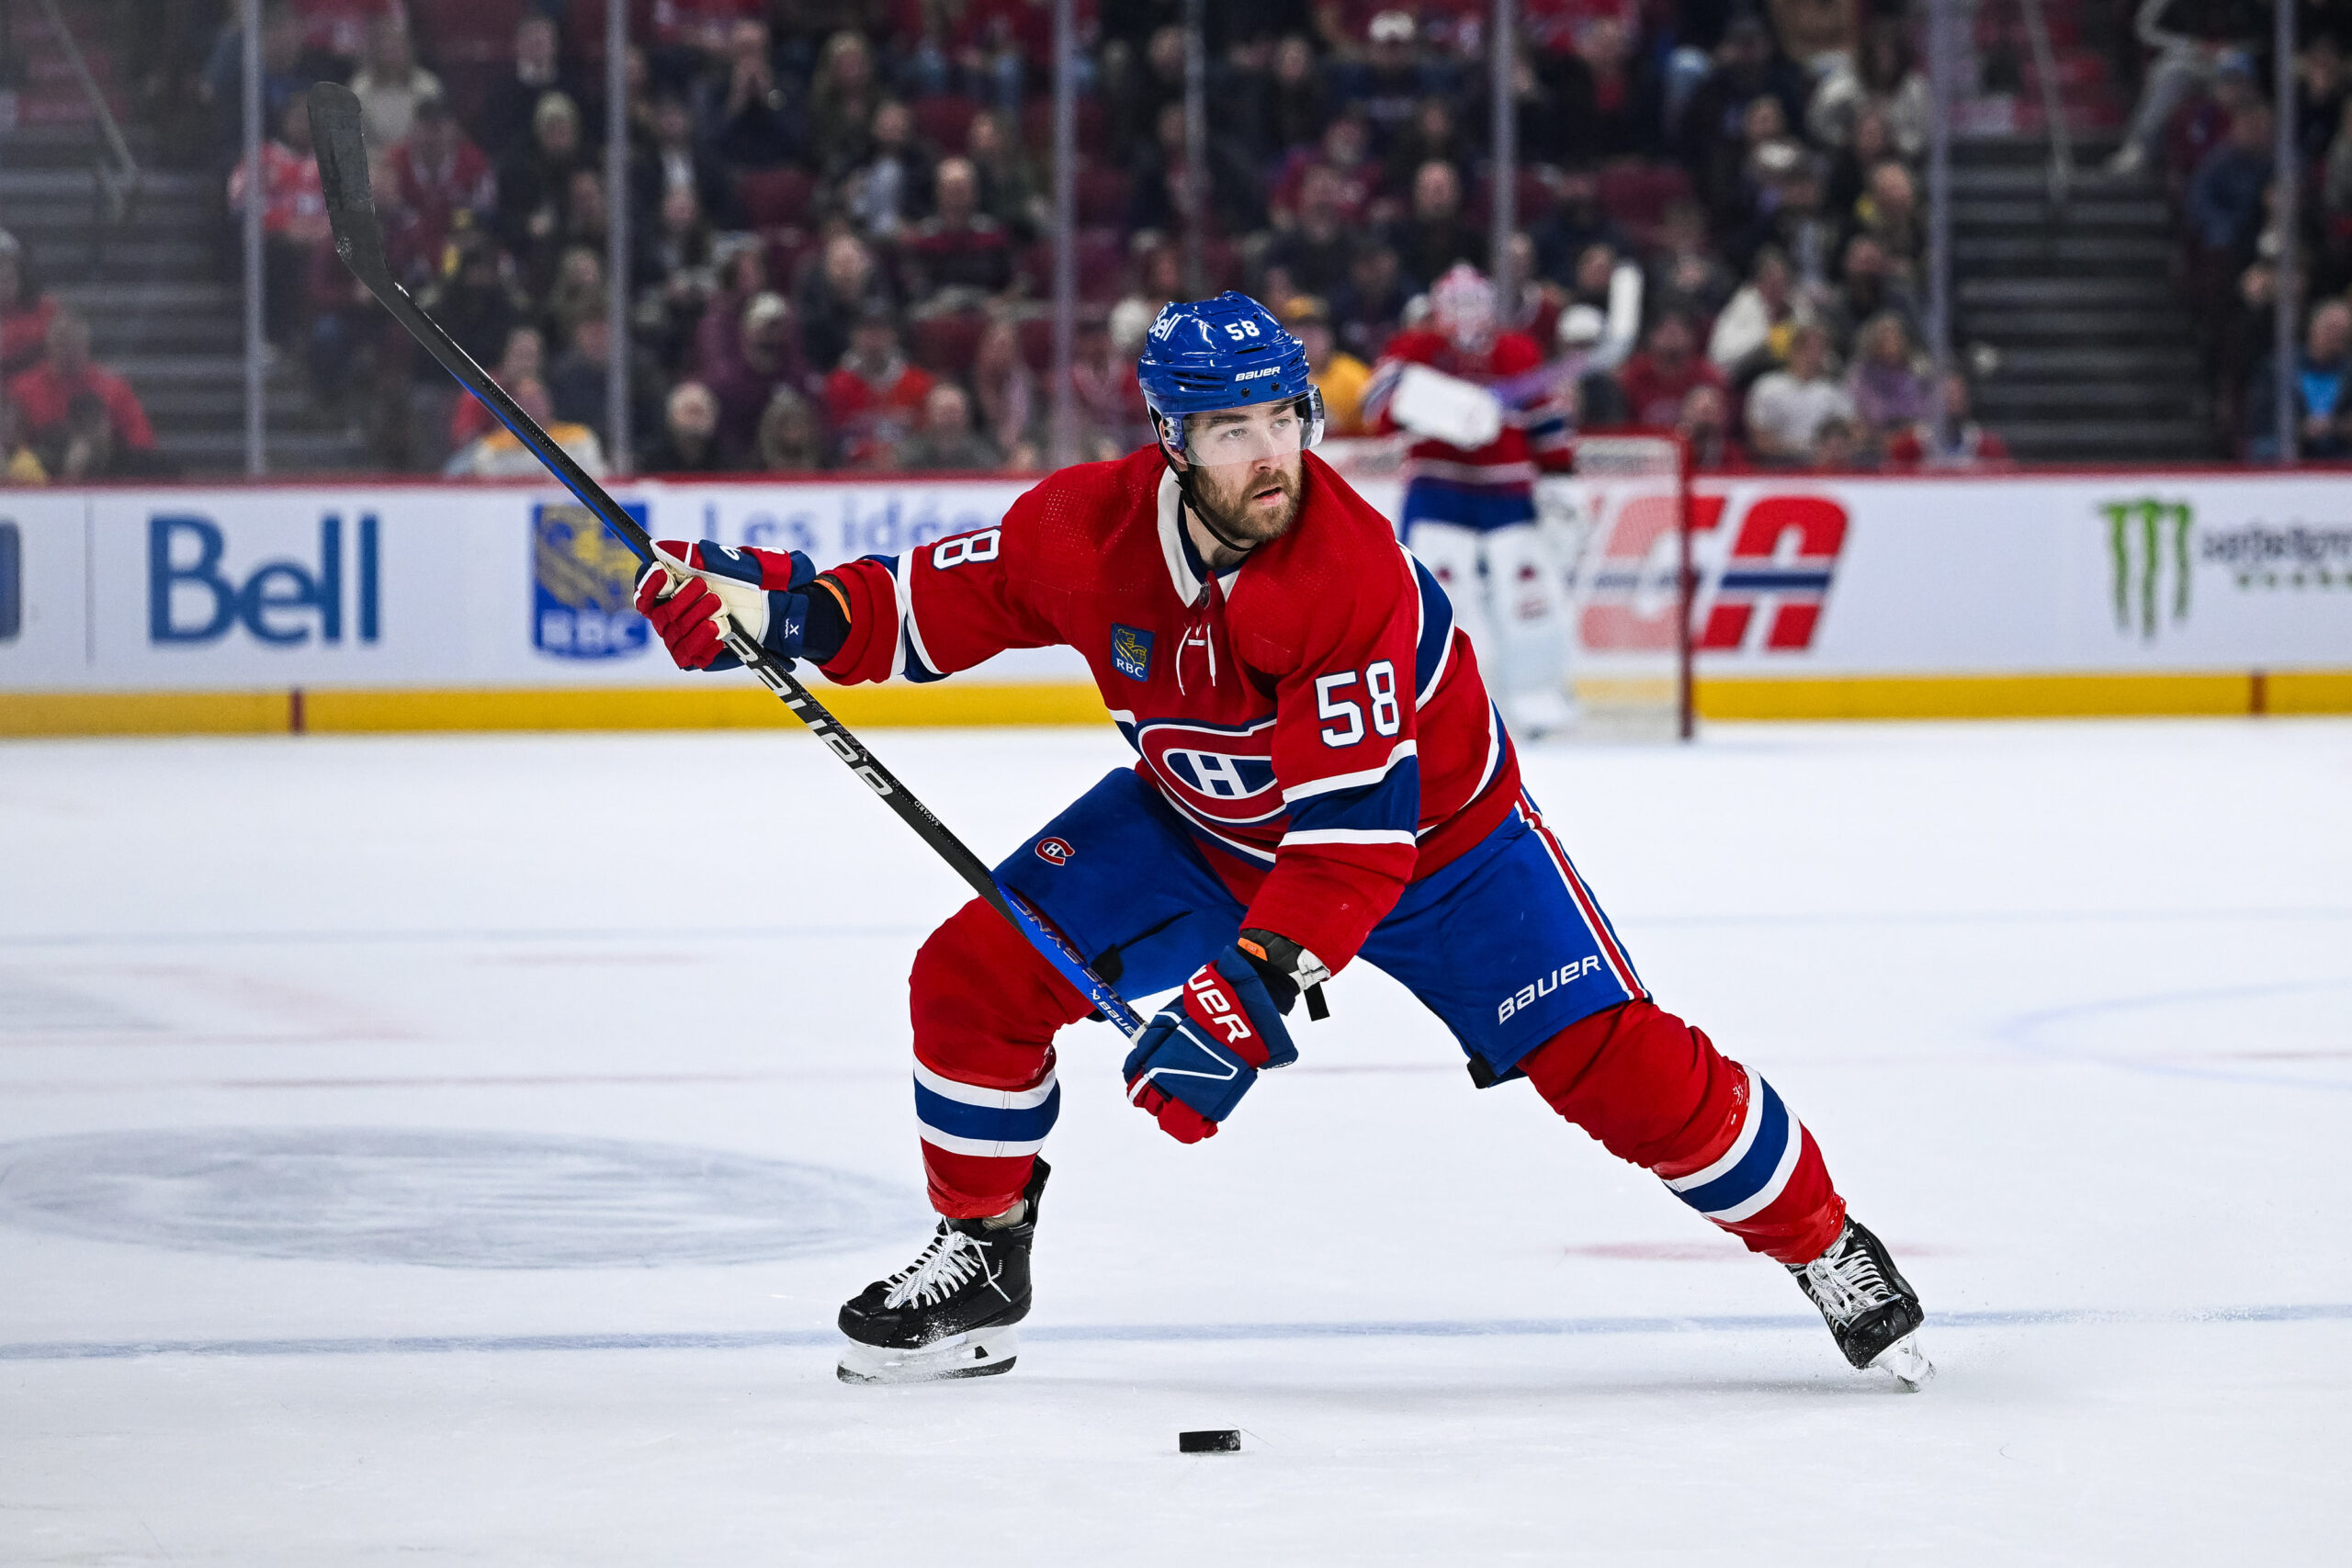 Montreal Canadiens: Will ice hockey's top trophy return home after